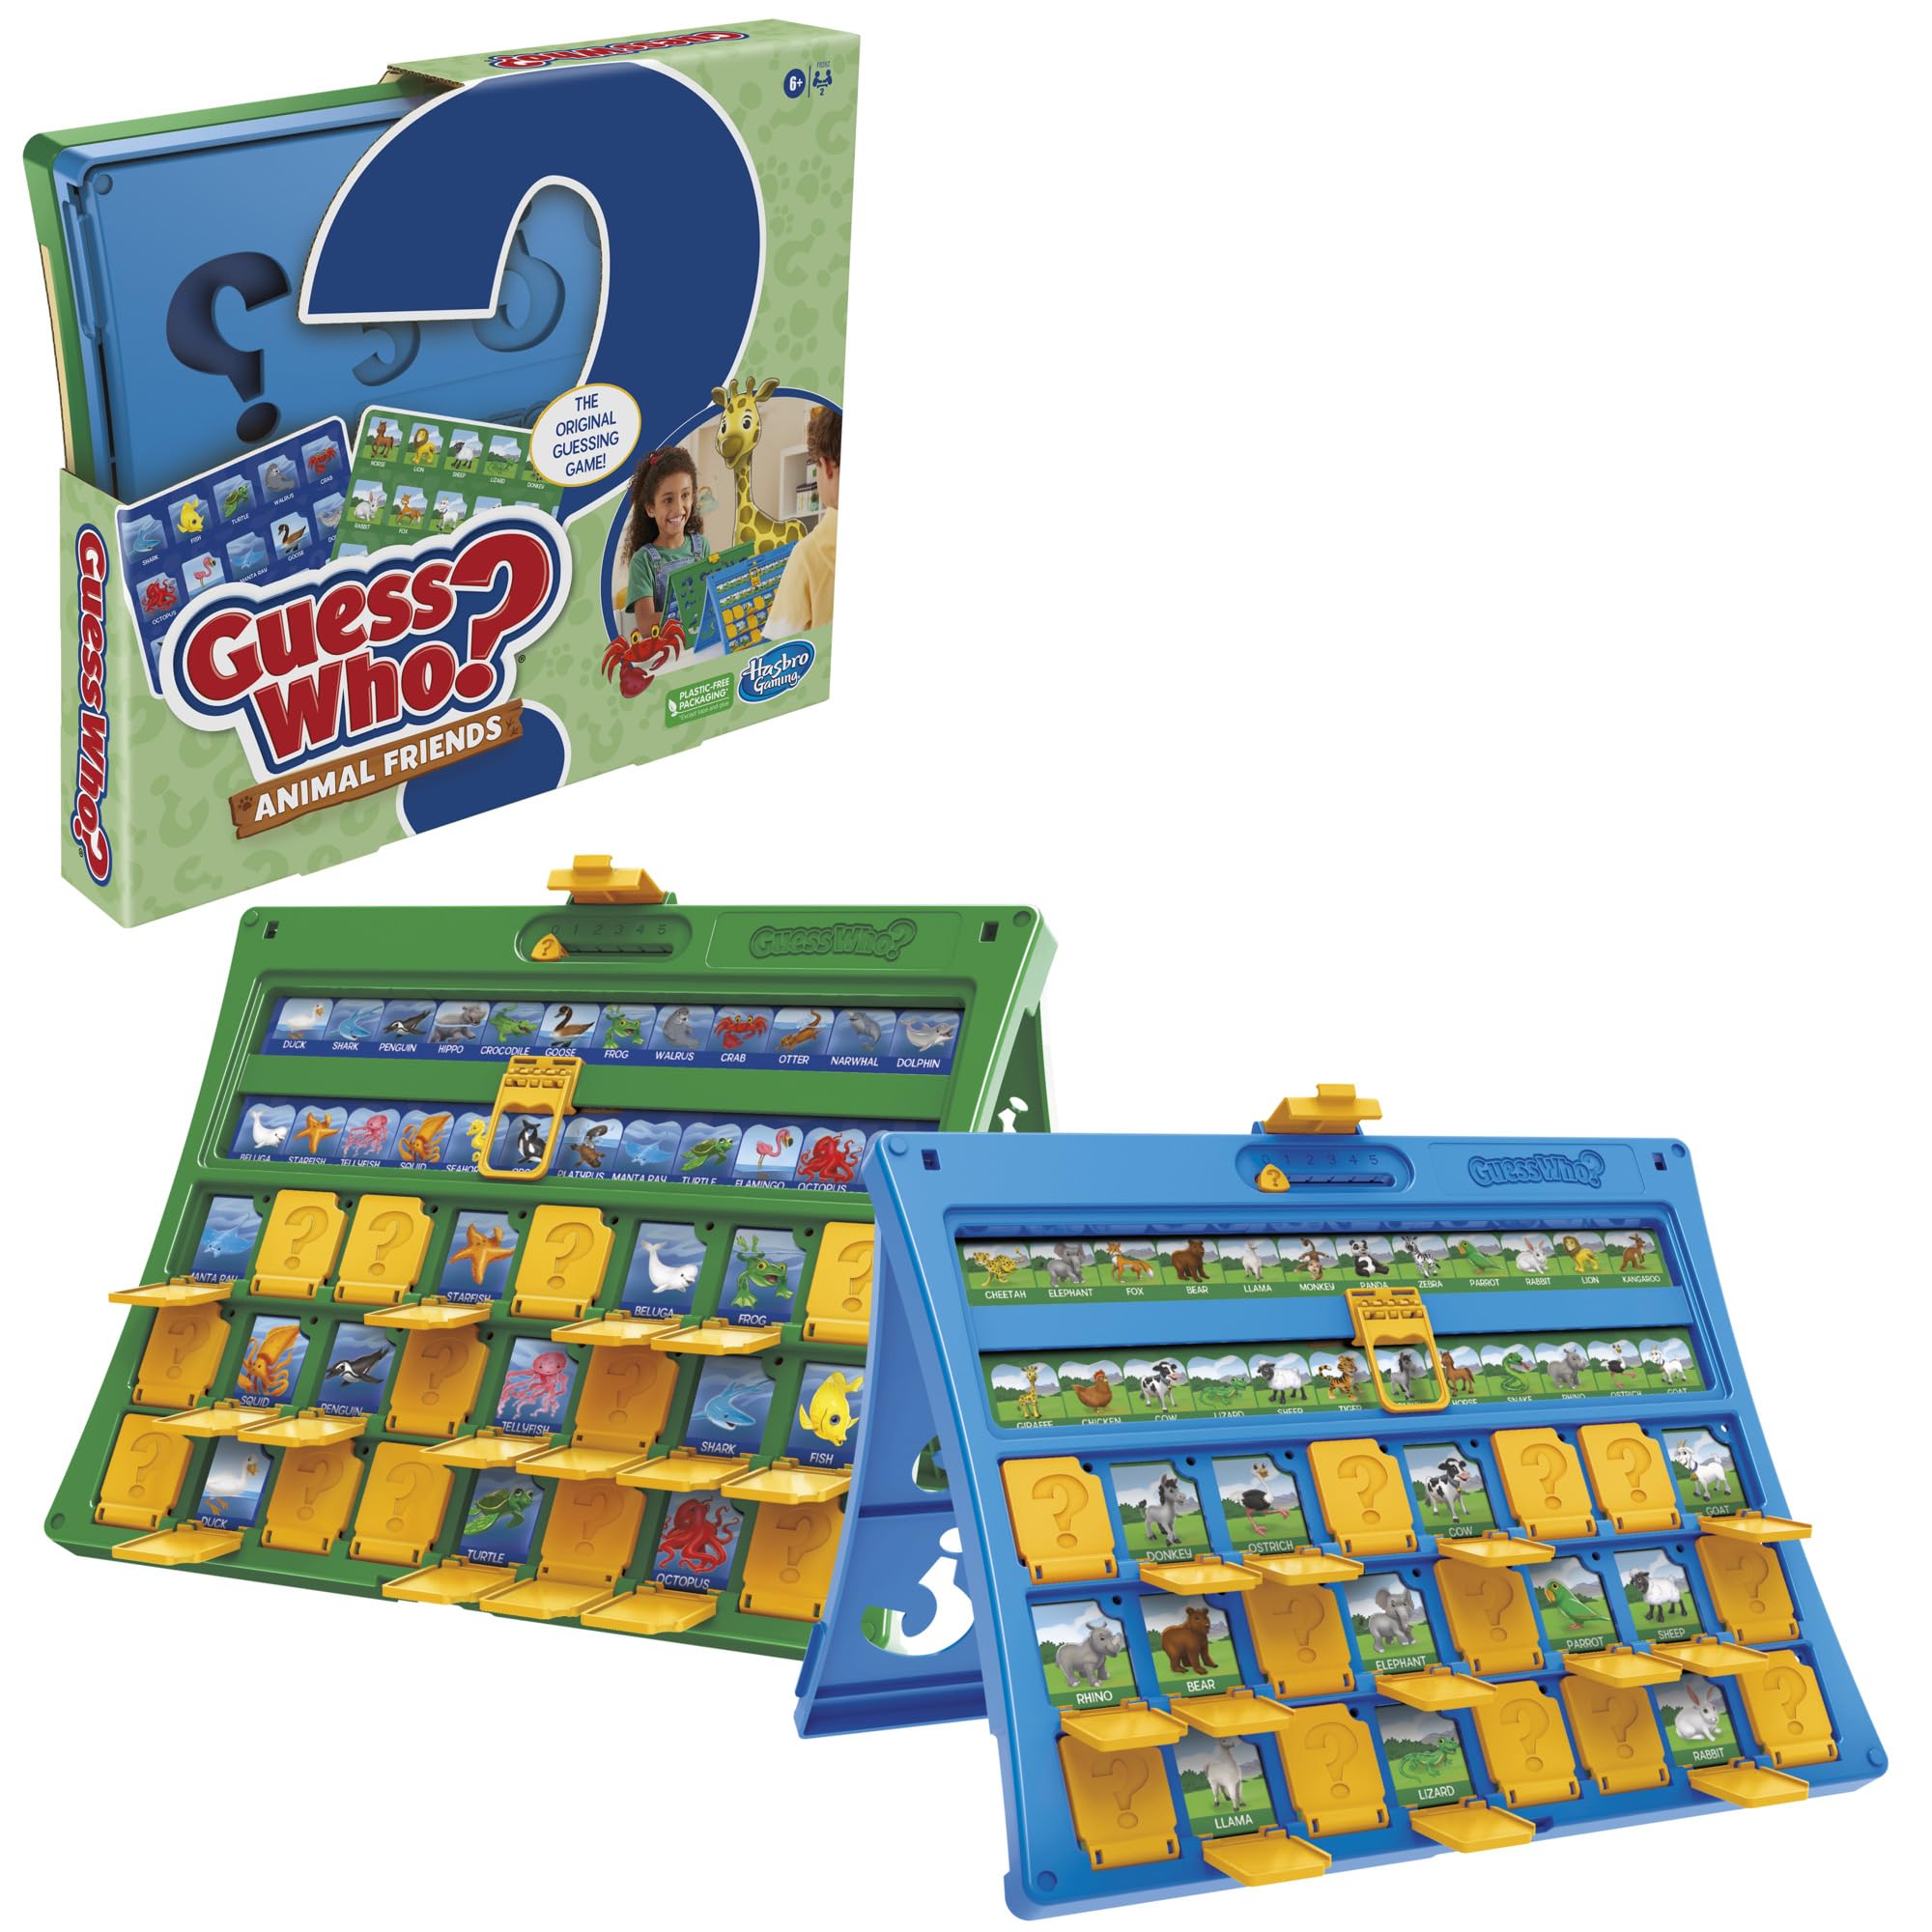 Hasbro Gaming Guess Who? Animal Friends Board Game for Kids Ages 6+, Guess Who? Game with Animals, Includes 2 Double-Sided Animal Sheets (Amazon Exclusive)